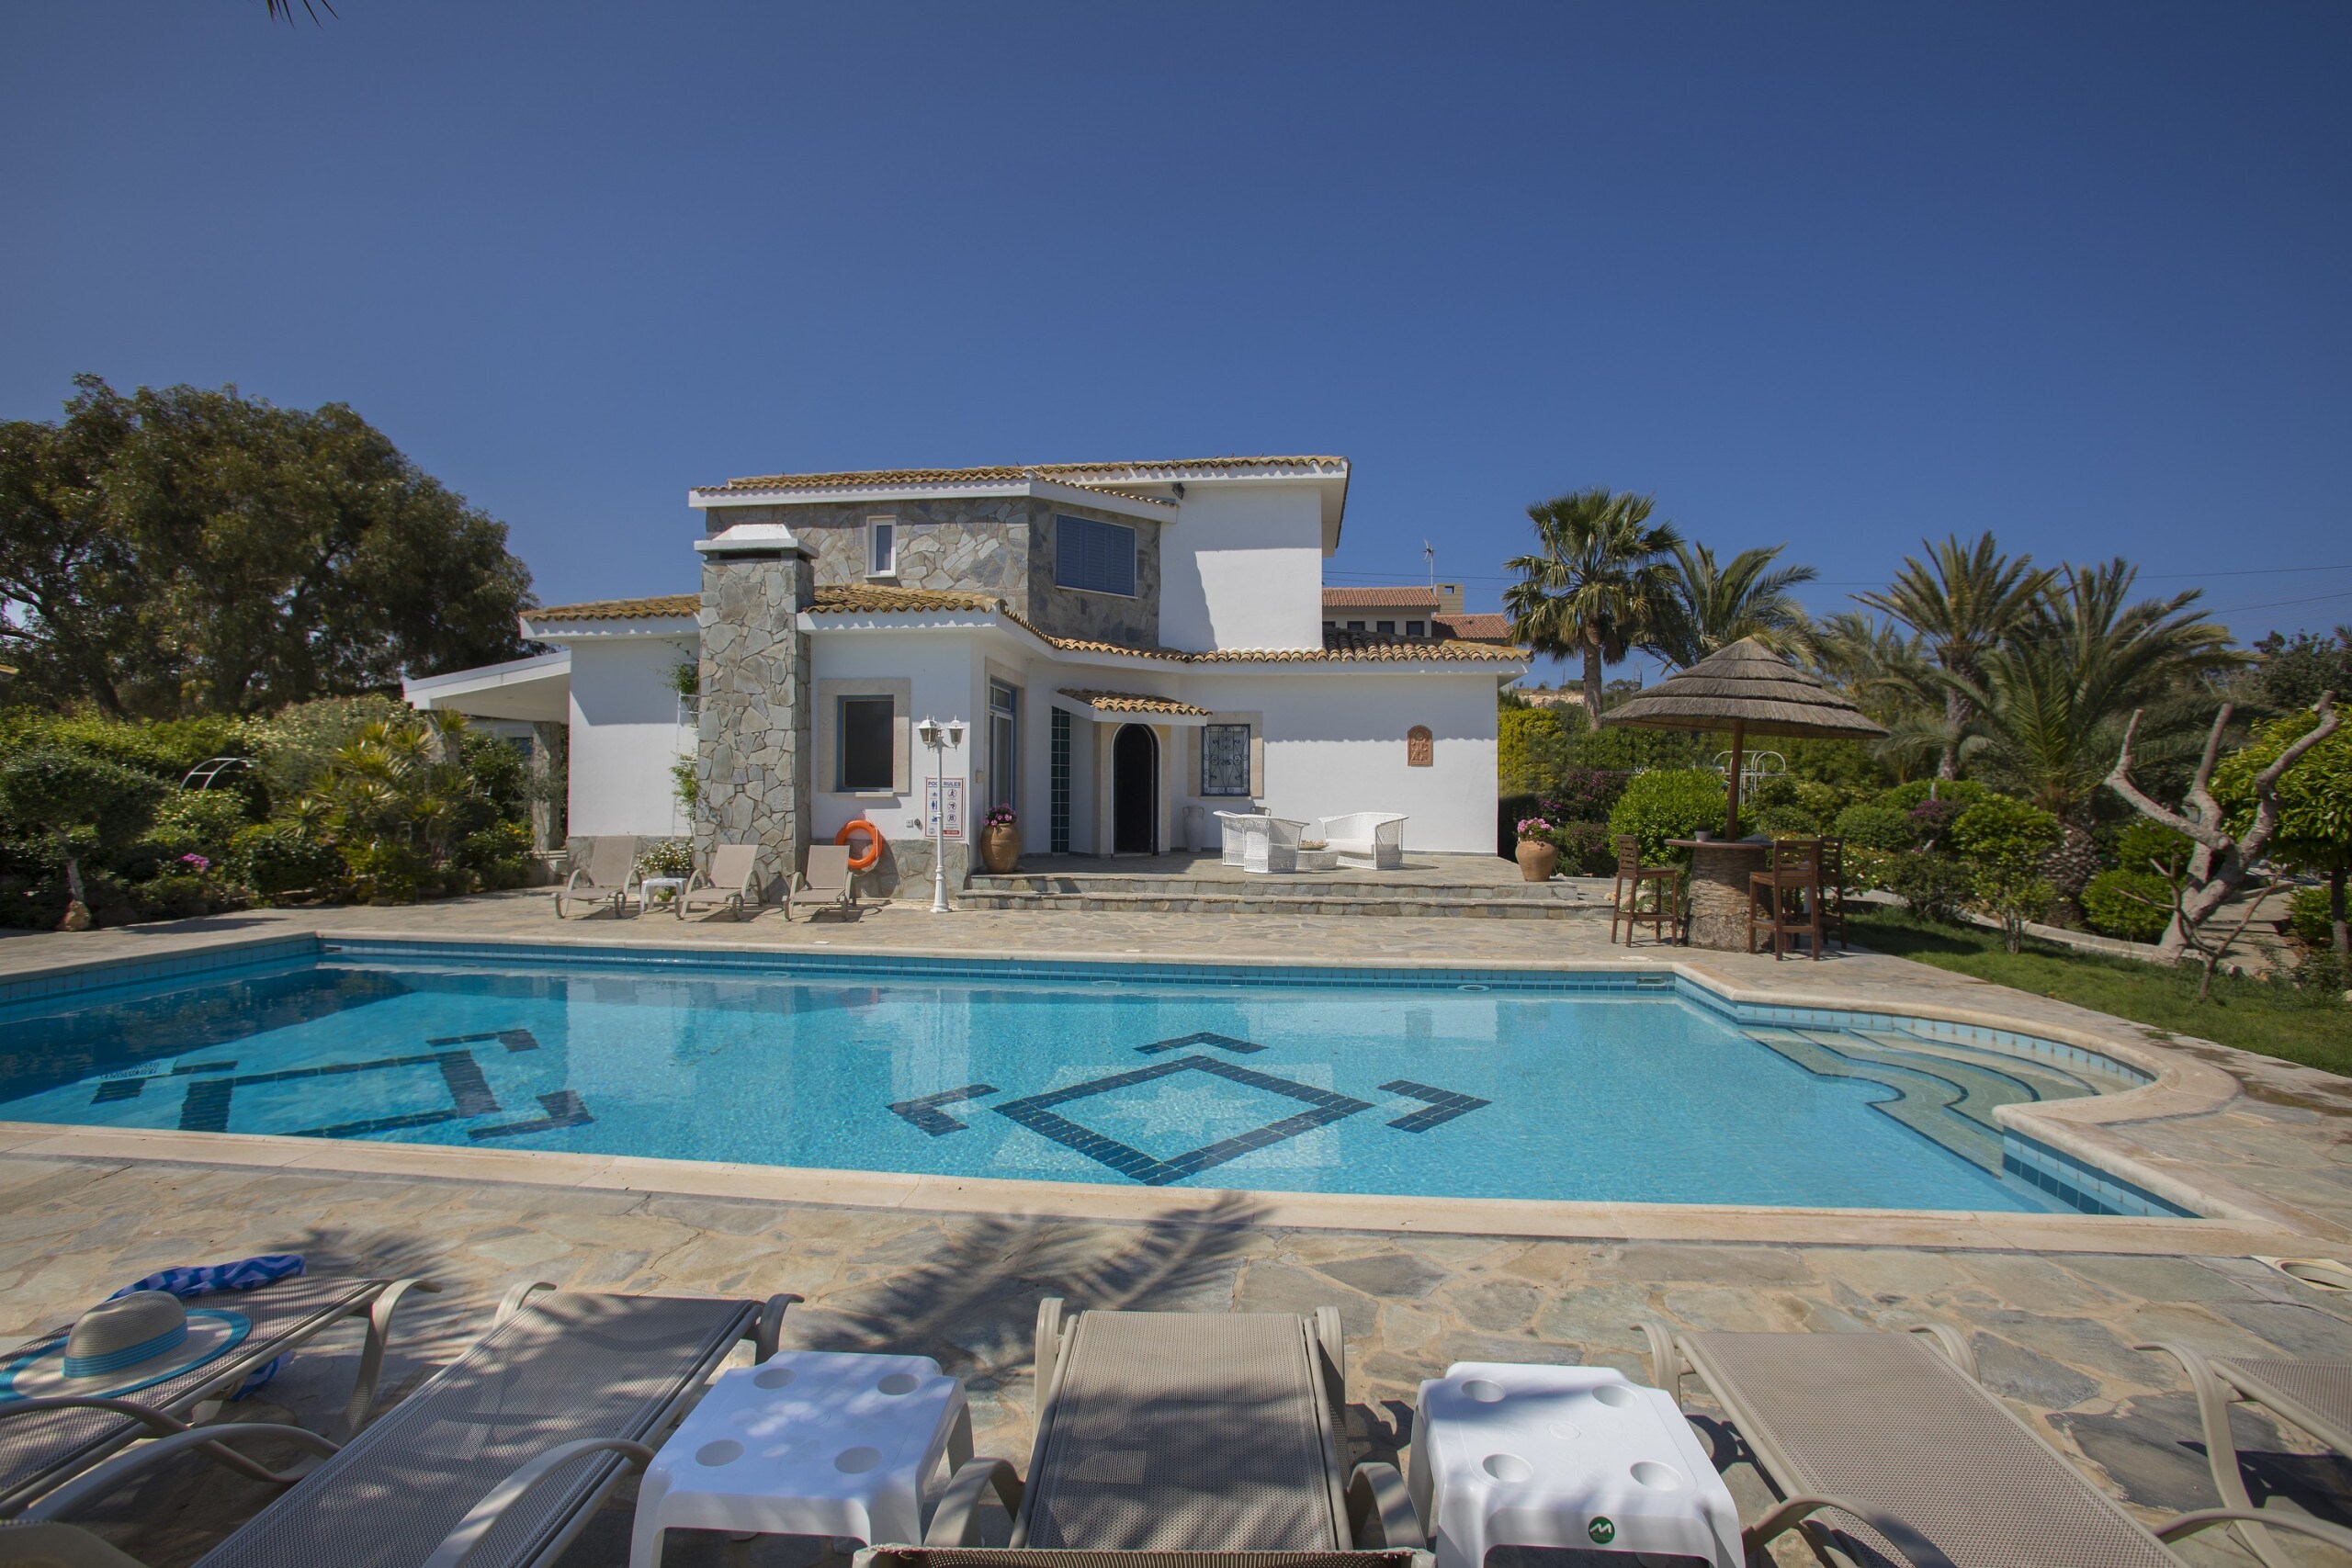 Property Image 2 - Vacation Villa with Great Pool Area near Cape Greco